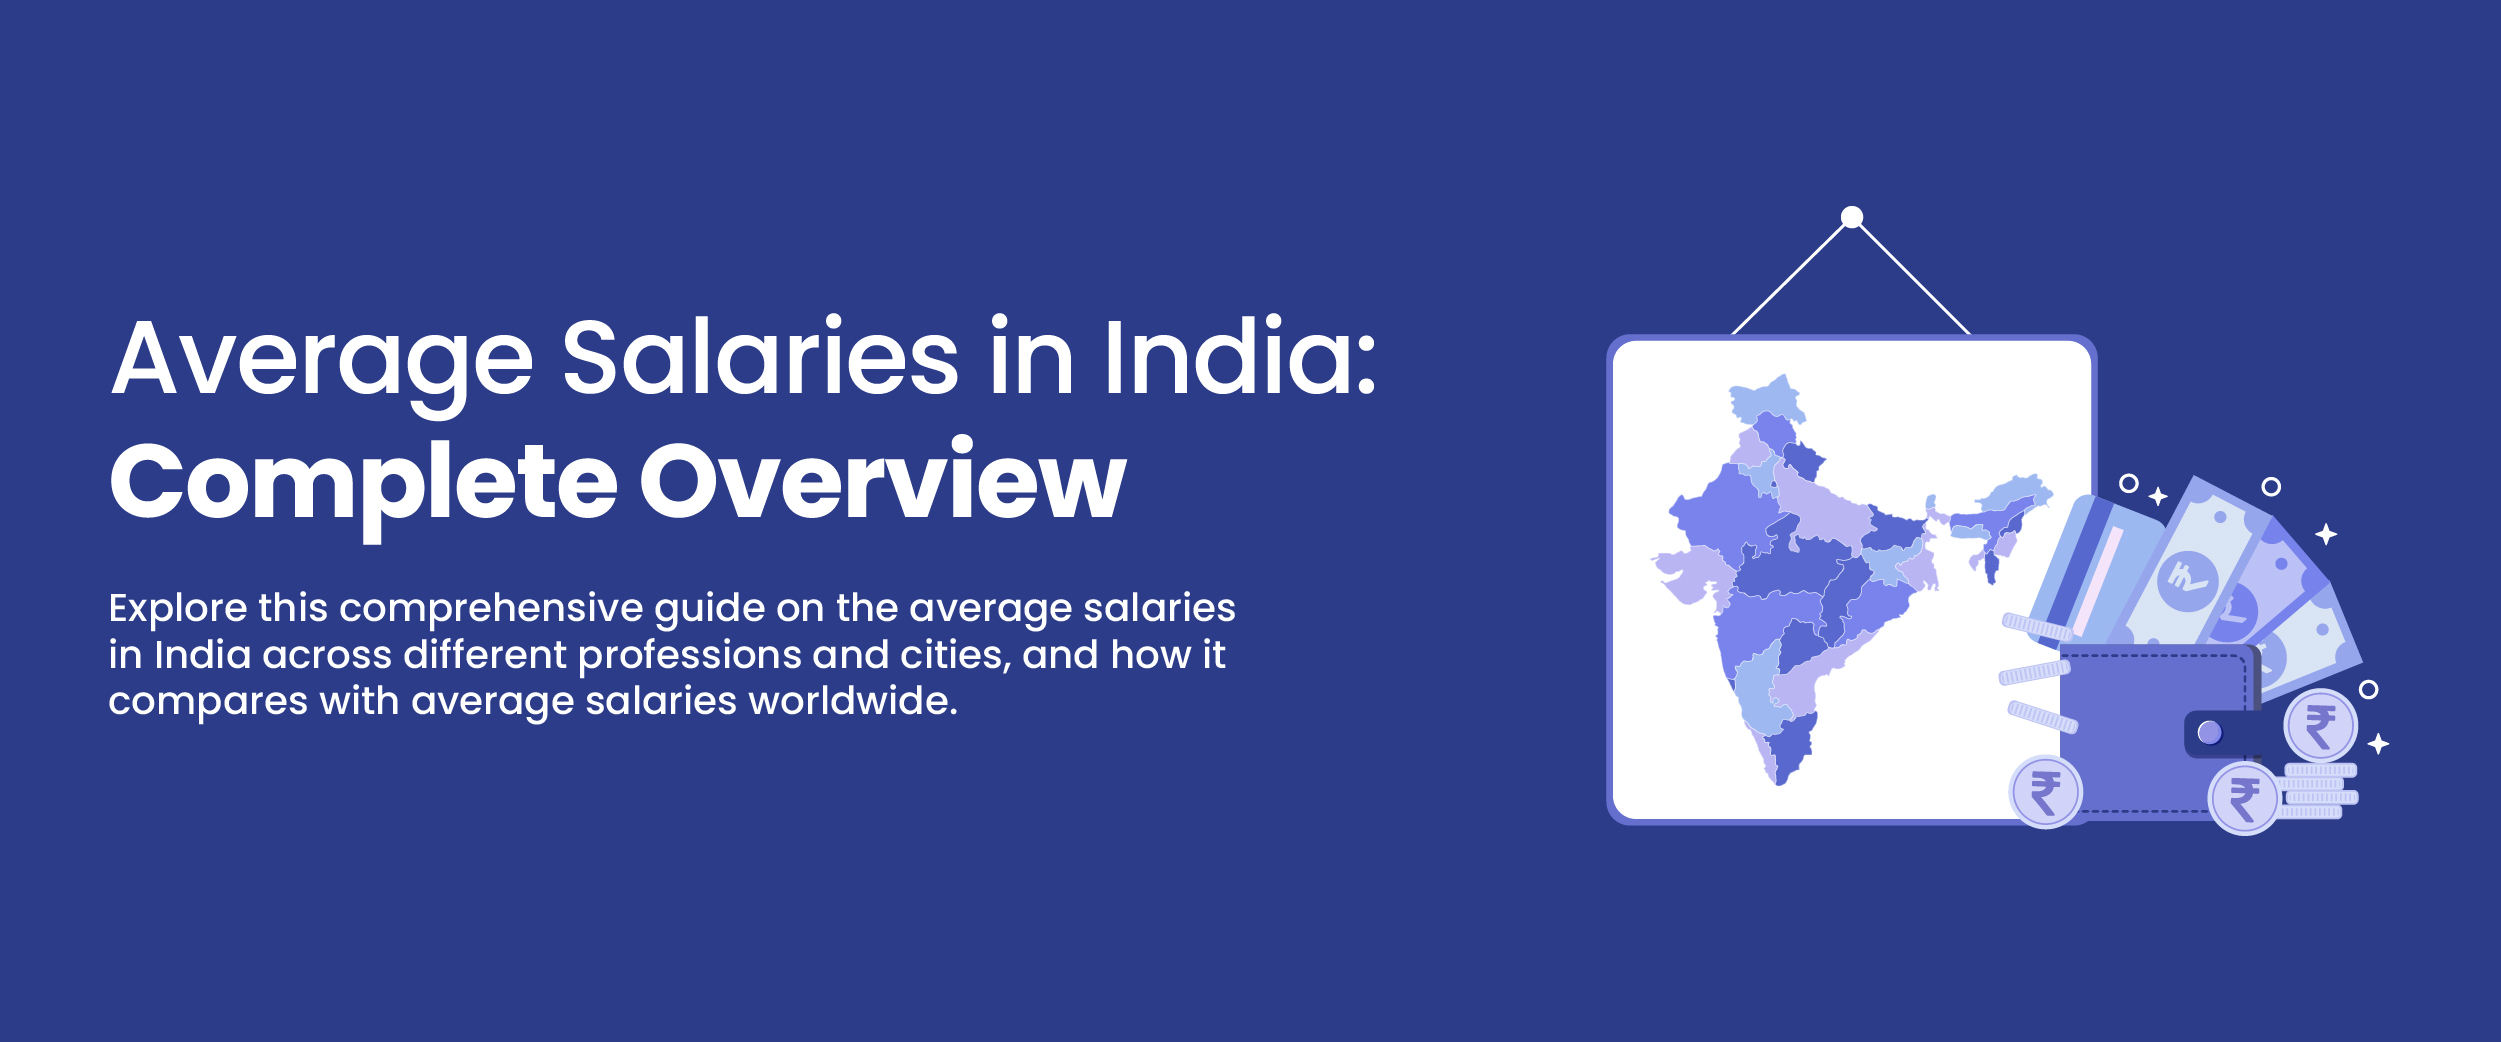 Average Salaries in India- Complete Overview